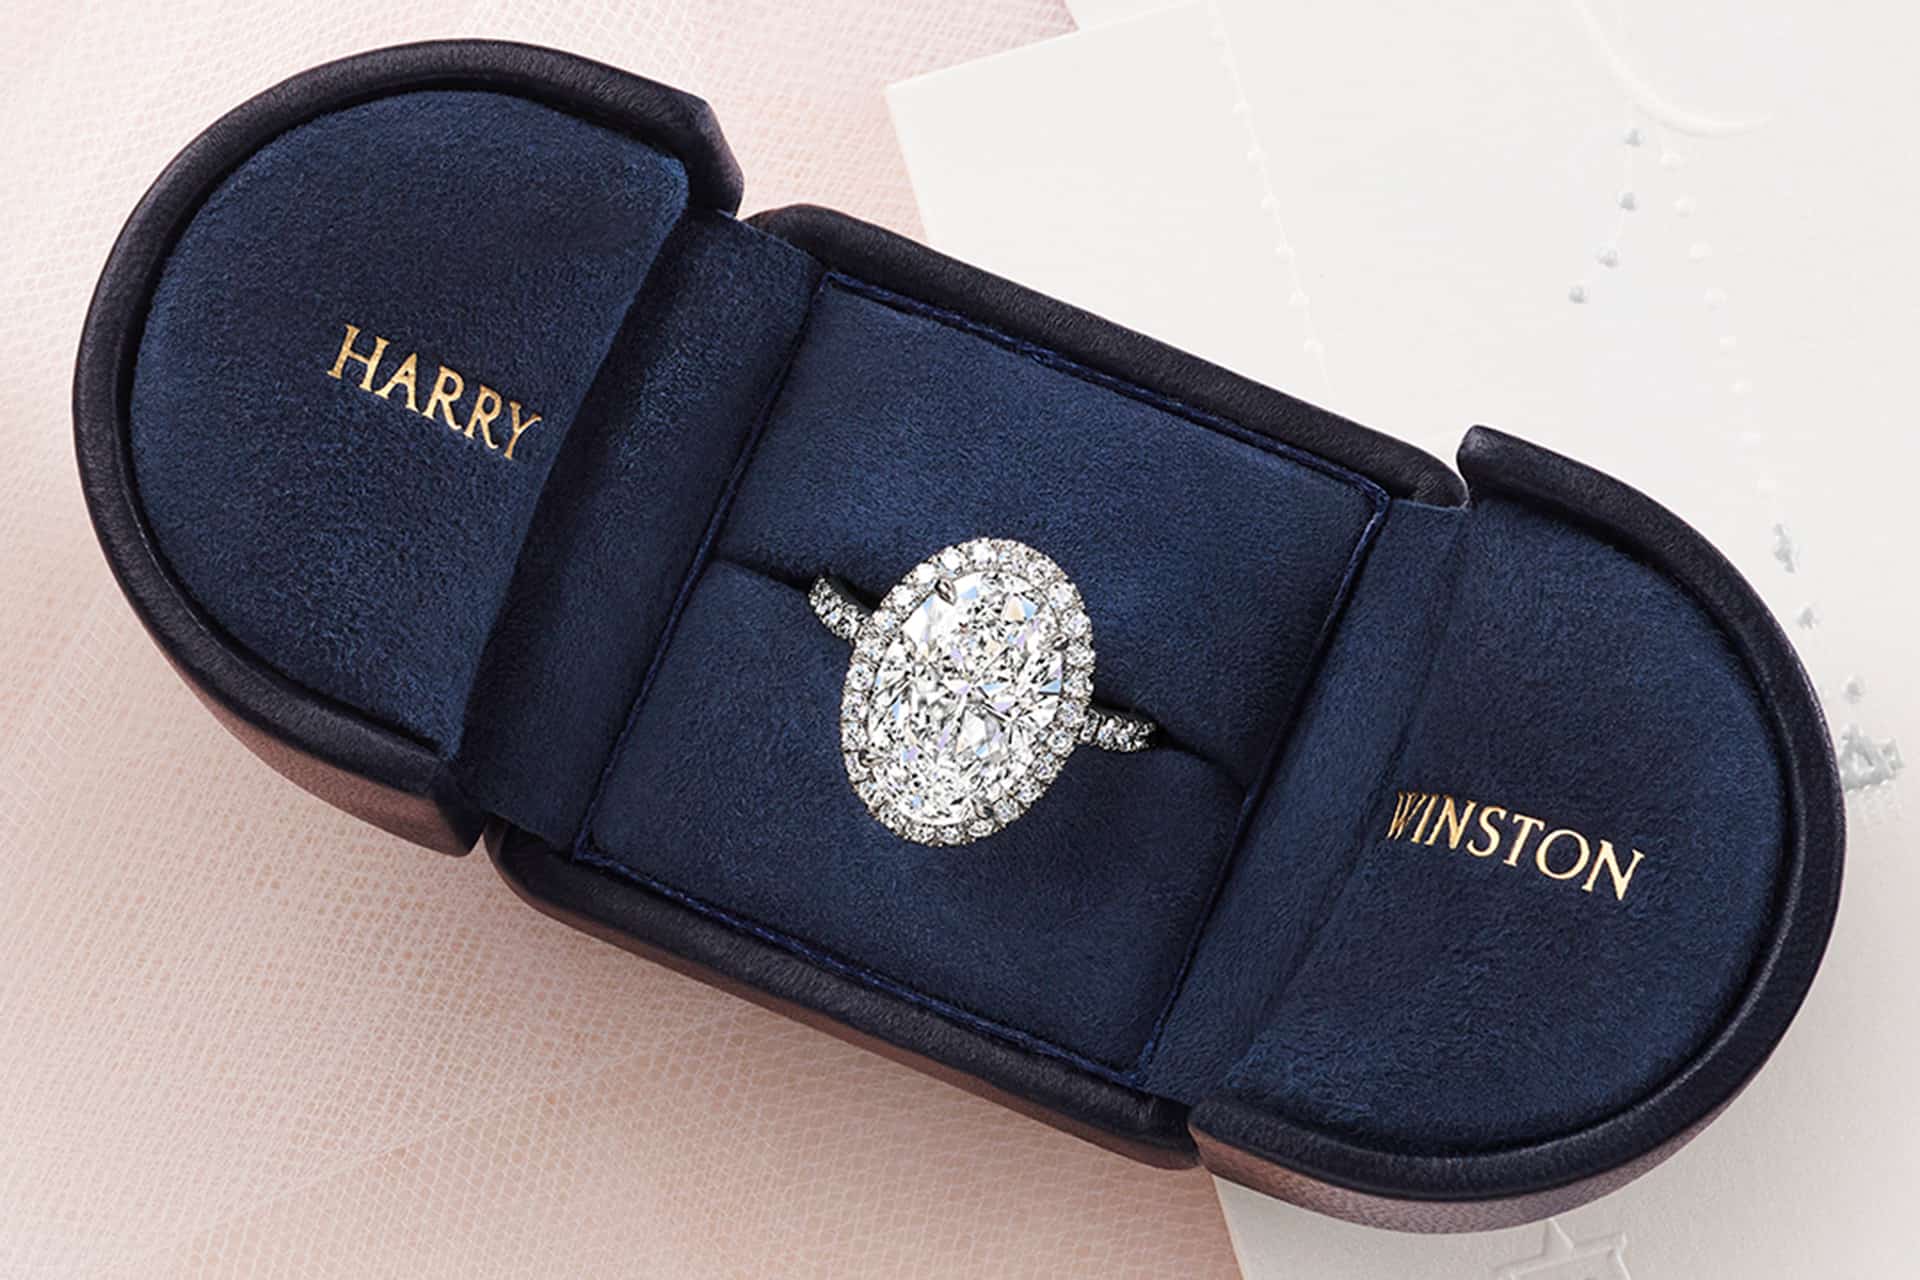 The One Oval-Shaped Engagement Ring | Harry Winston